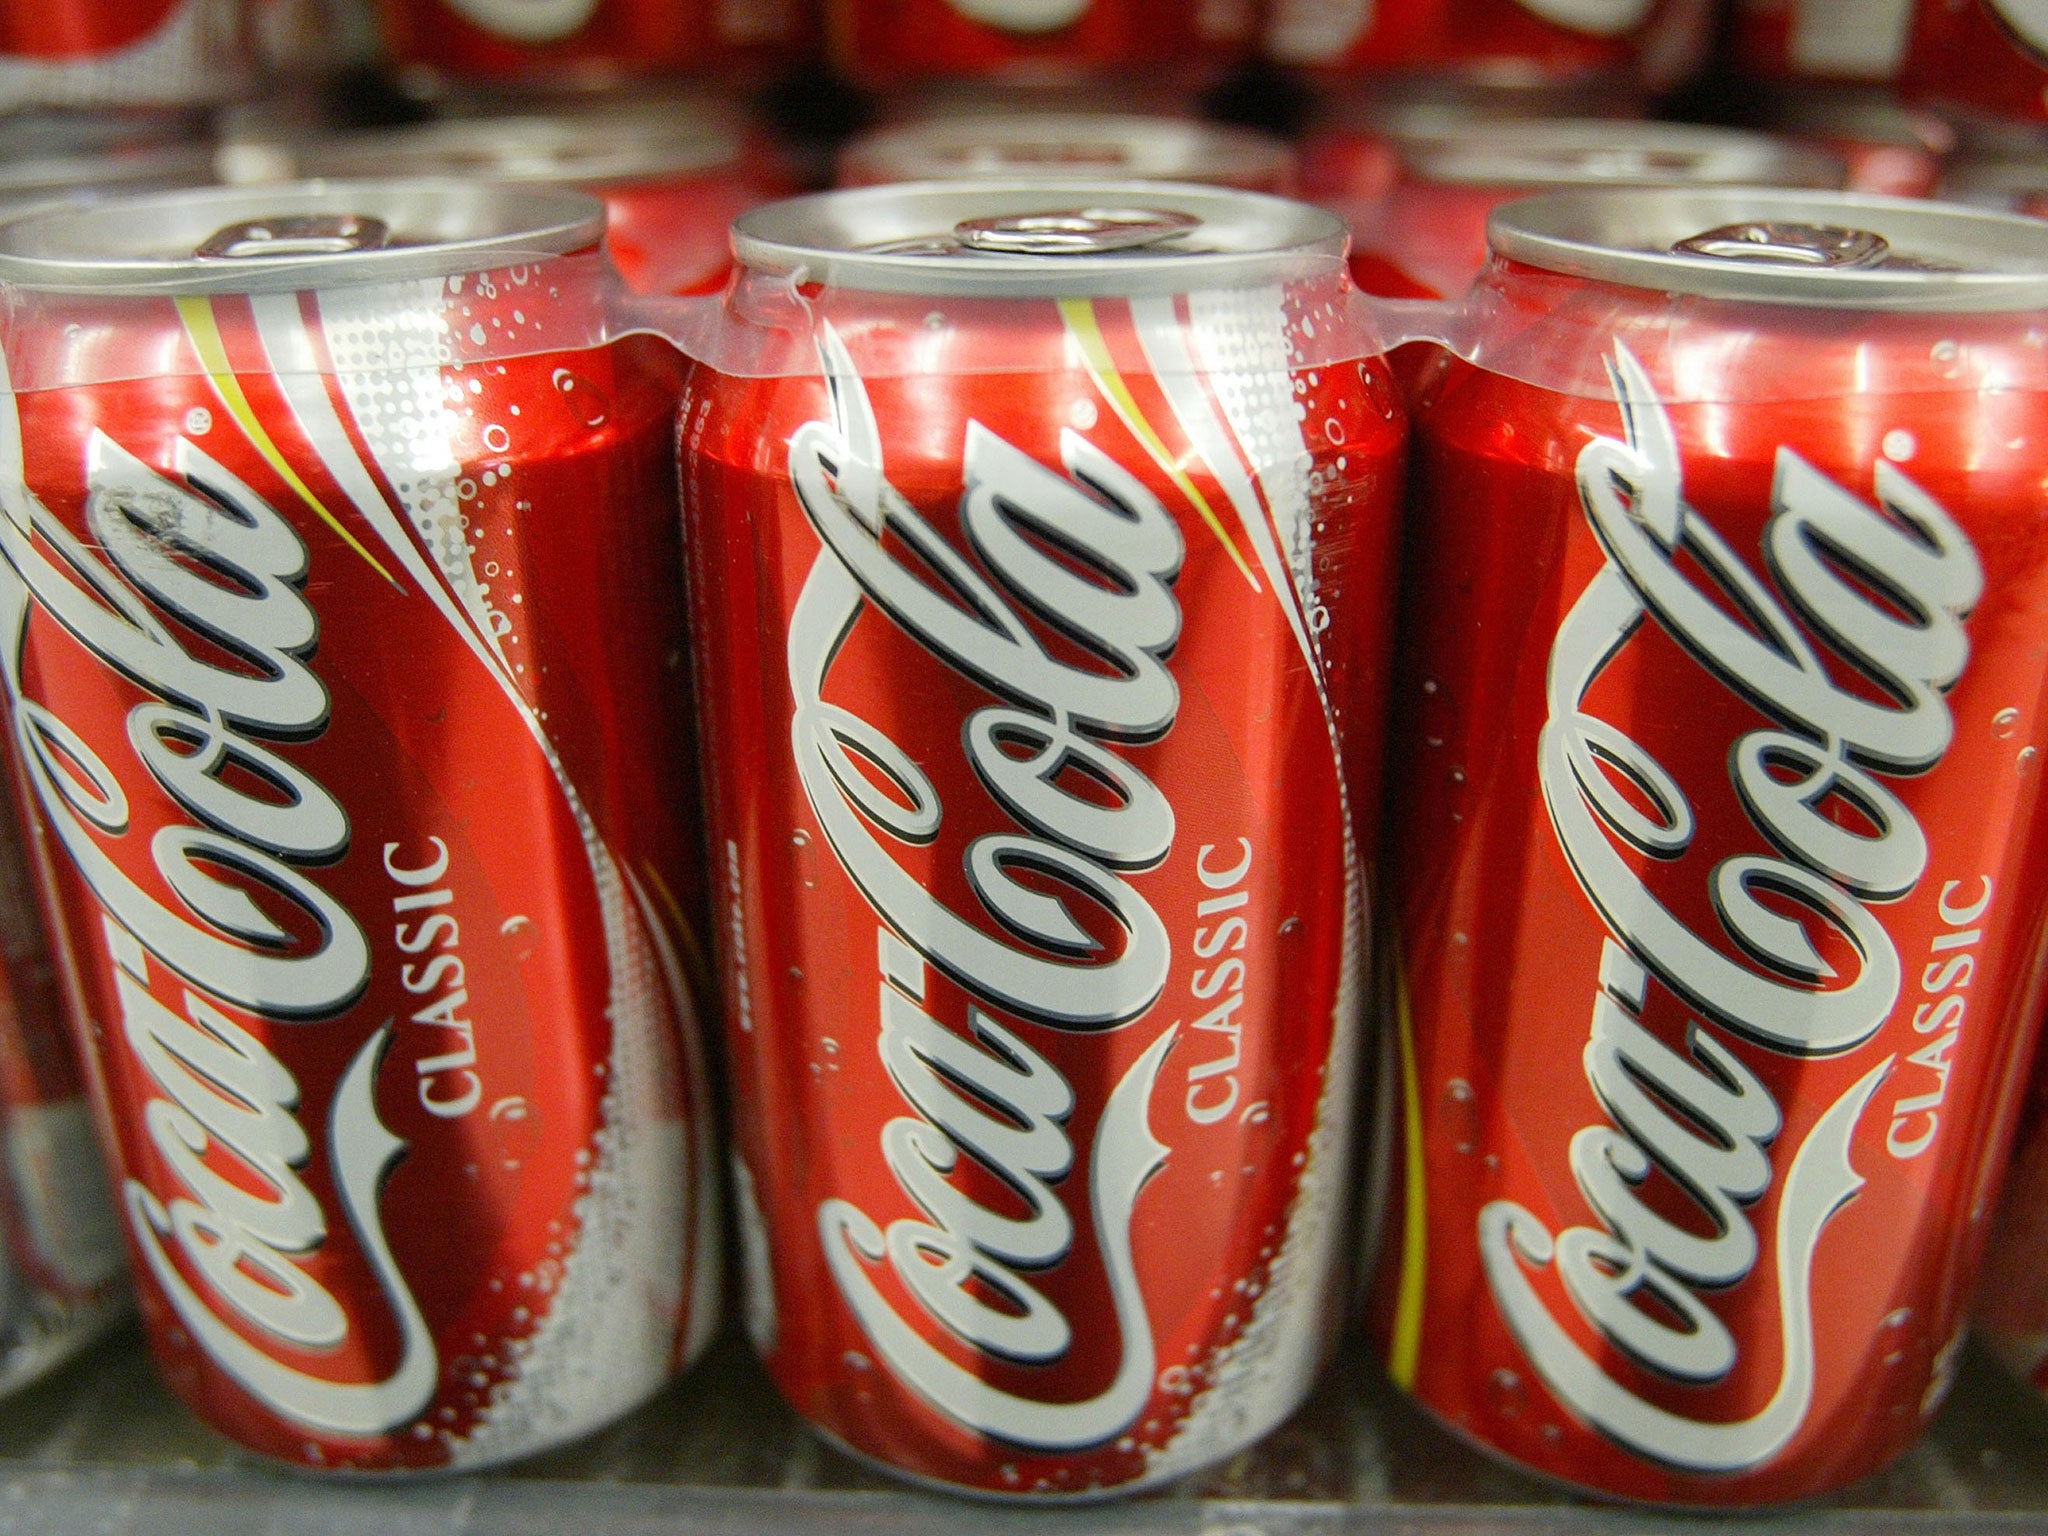 Den Hollander said the nutritional information on Coca Cola products helps consumers to make “informed choices”